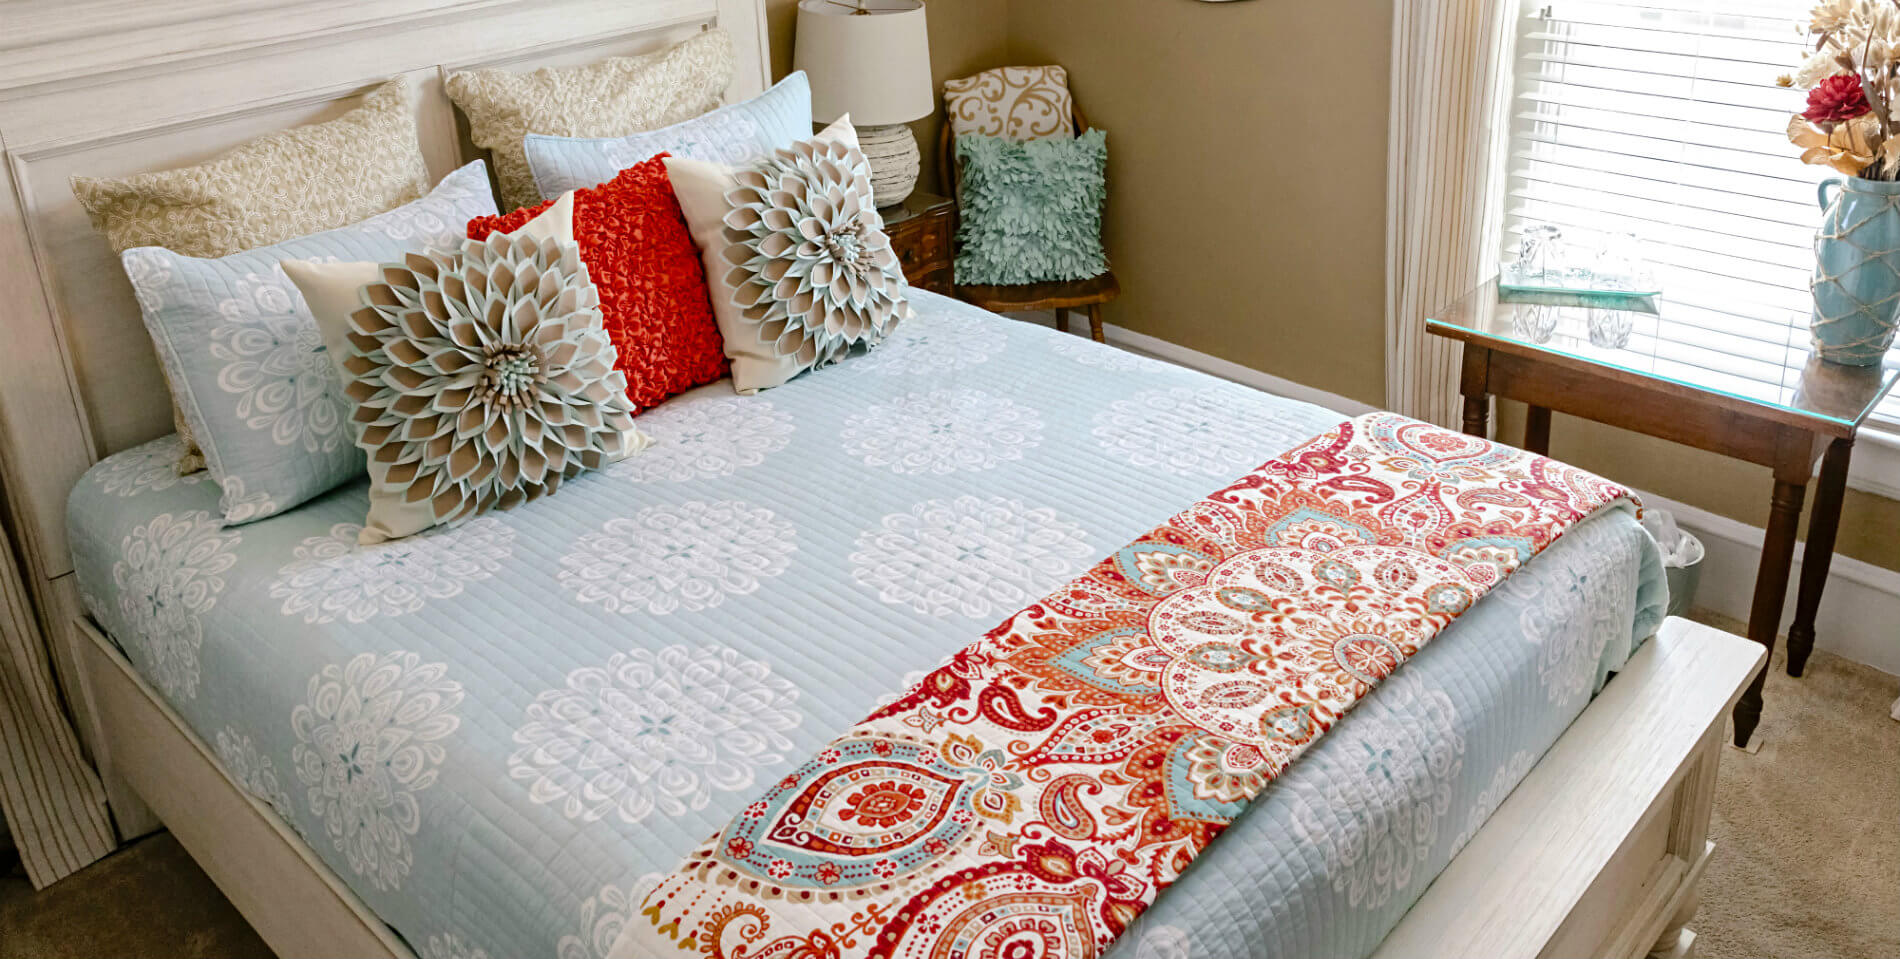 The bed with a light blue and white patterned comforter, red paisley patterned throw and decorative pillows. 